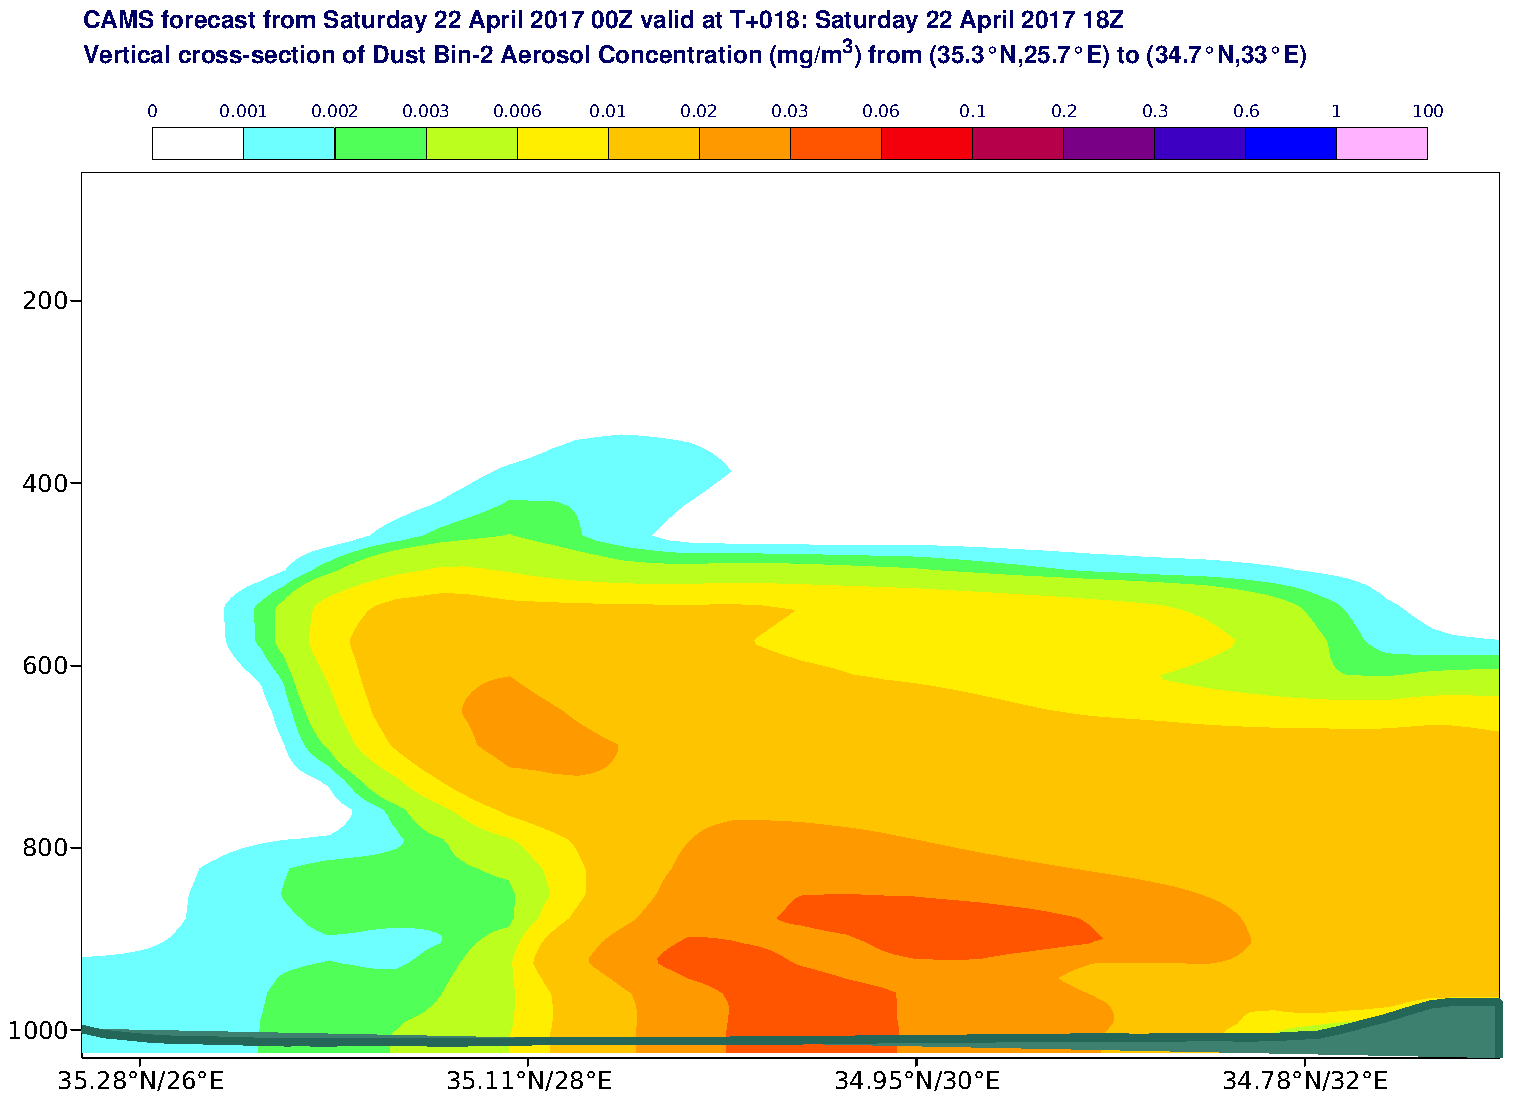 Vertical cross-section of Dust Bin-2 Aerosol Concentration (mg/m3) valid at T18 - 2017-04-22 18:00